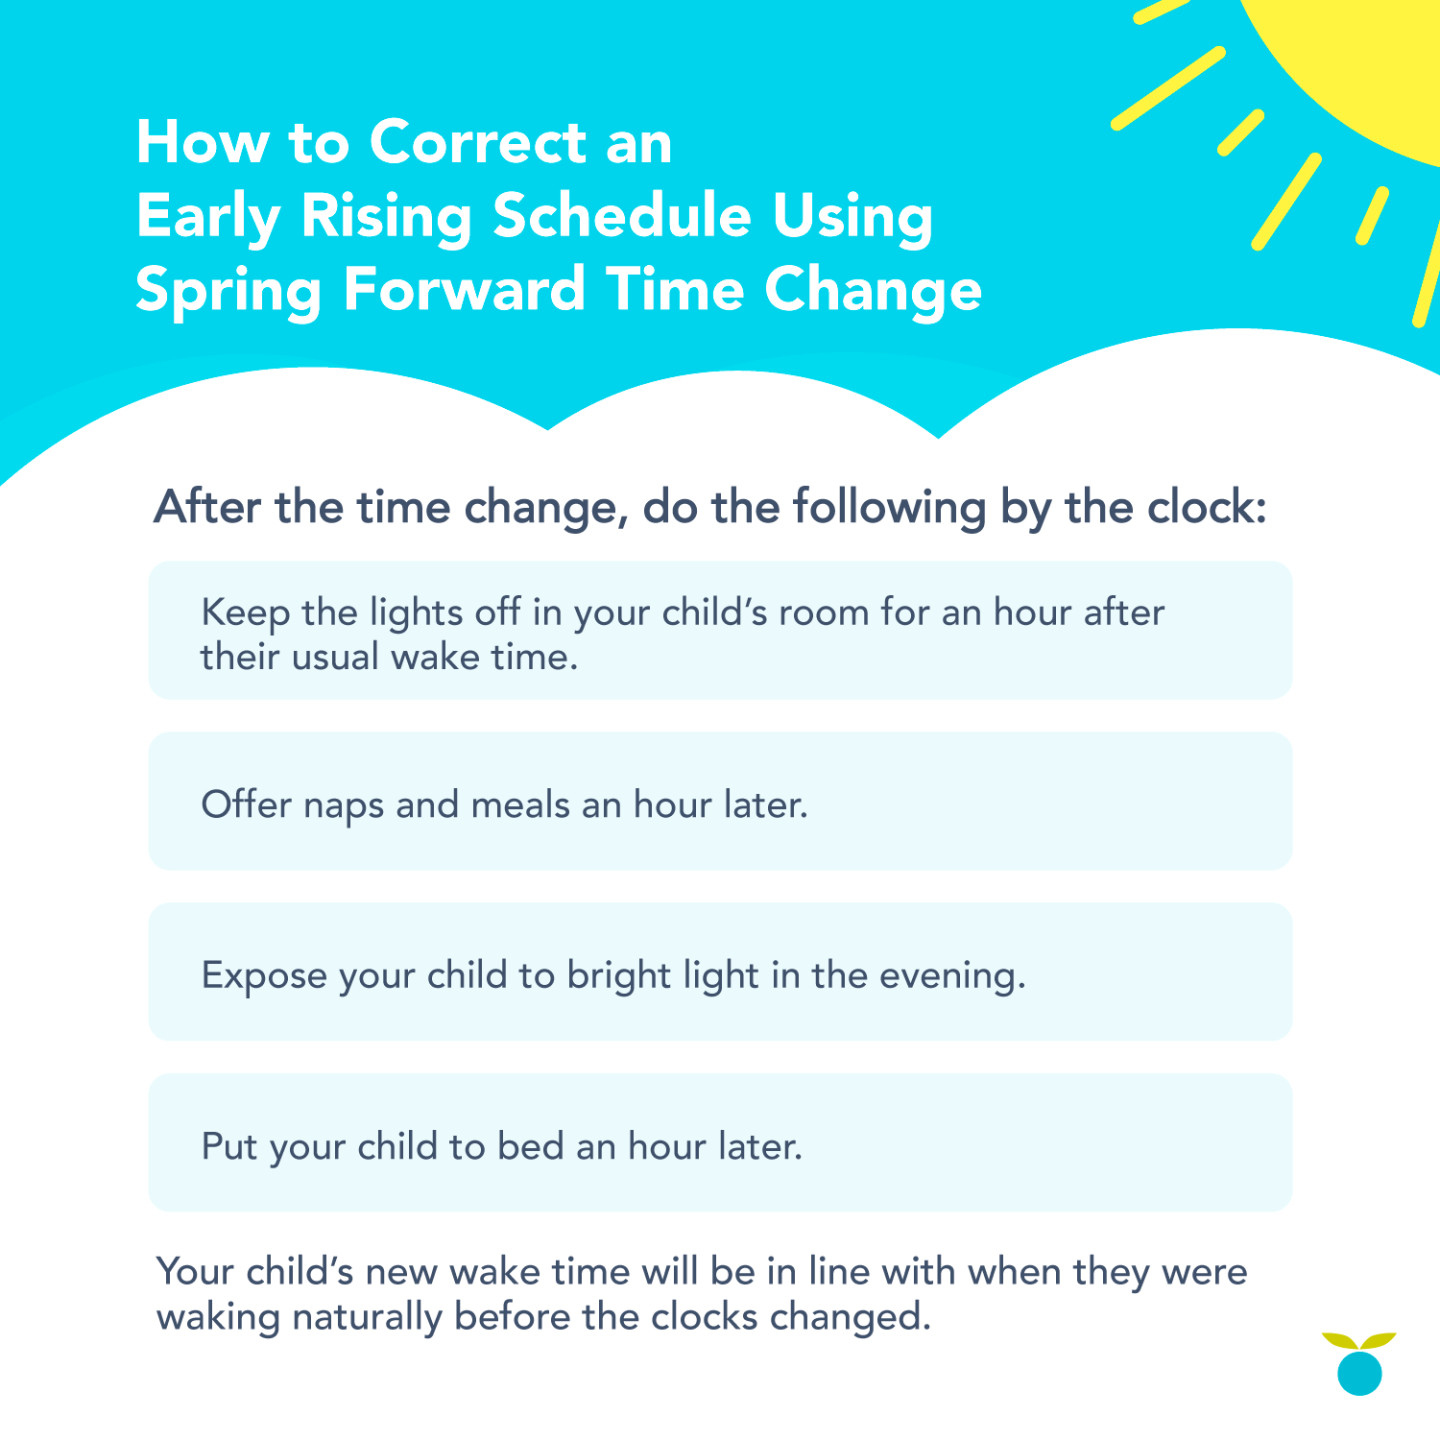 Here's how to use the spring DST time change to correct the sleep schedule of a child who is waking up too early.